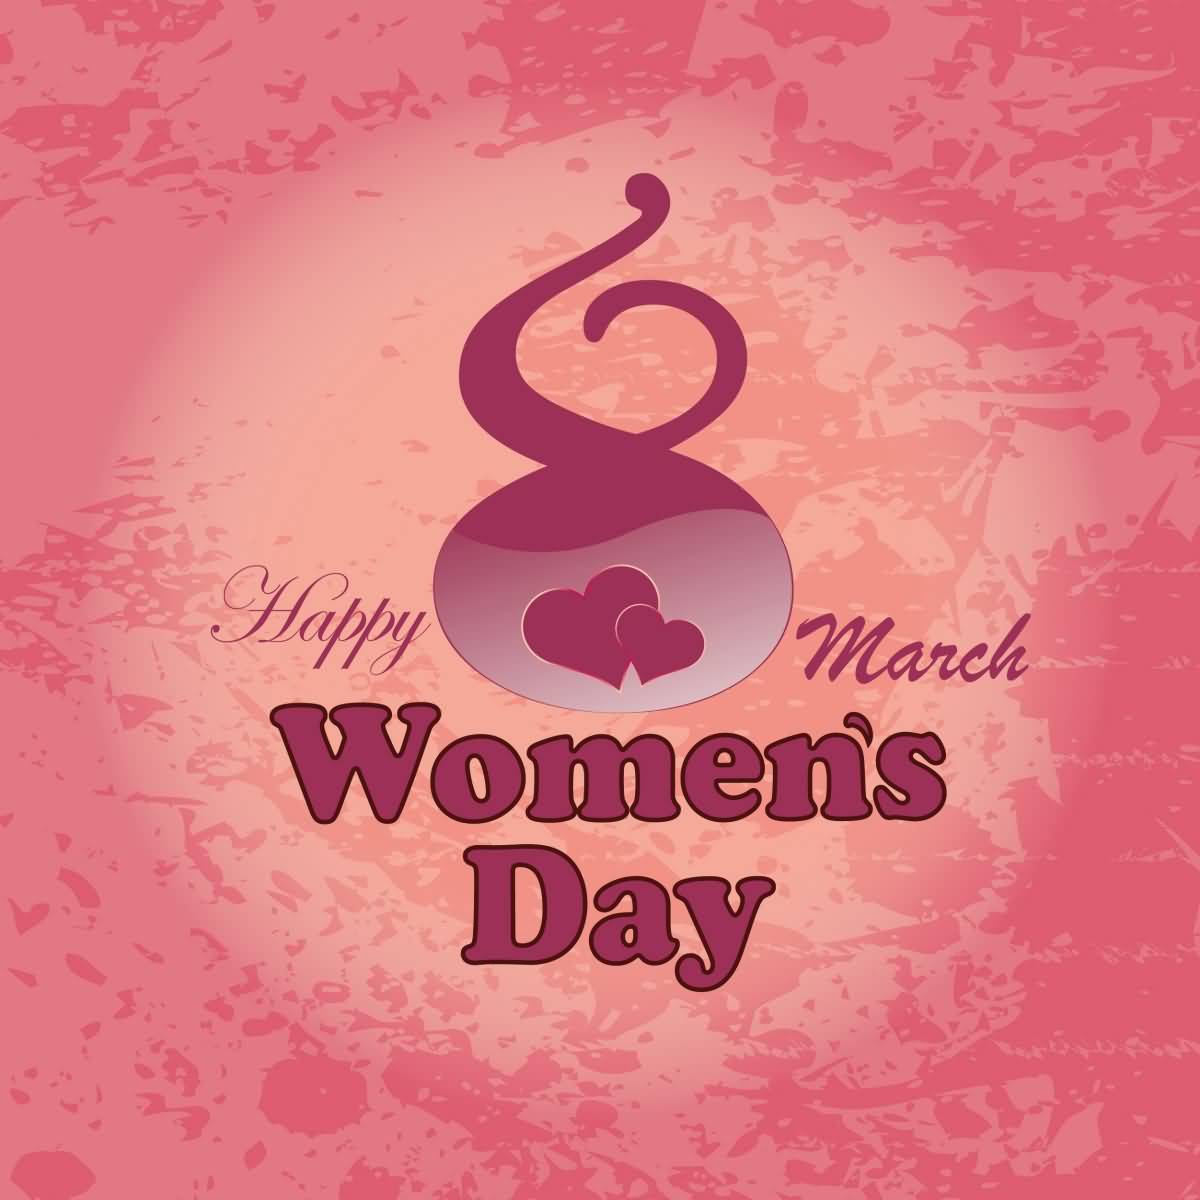 45 Most Beautiful Women’s Day Greeting Card Pictures